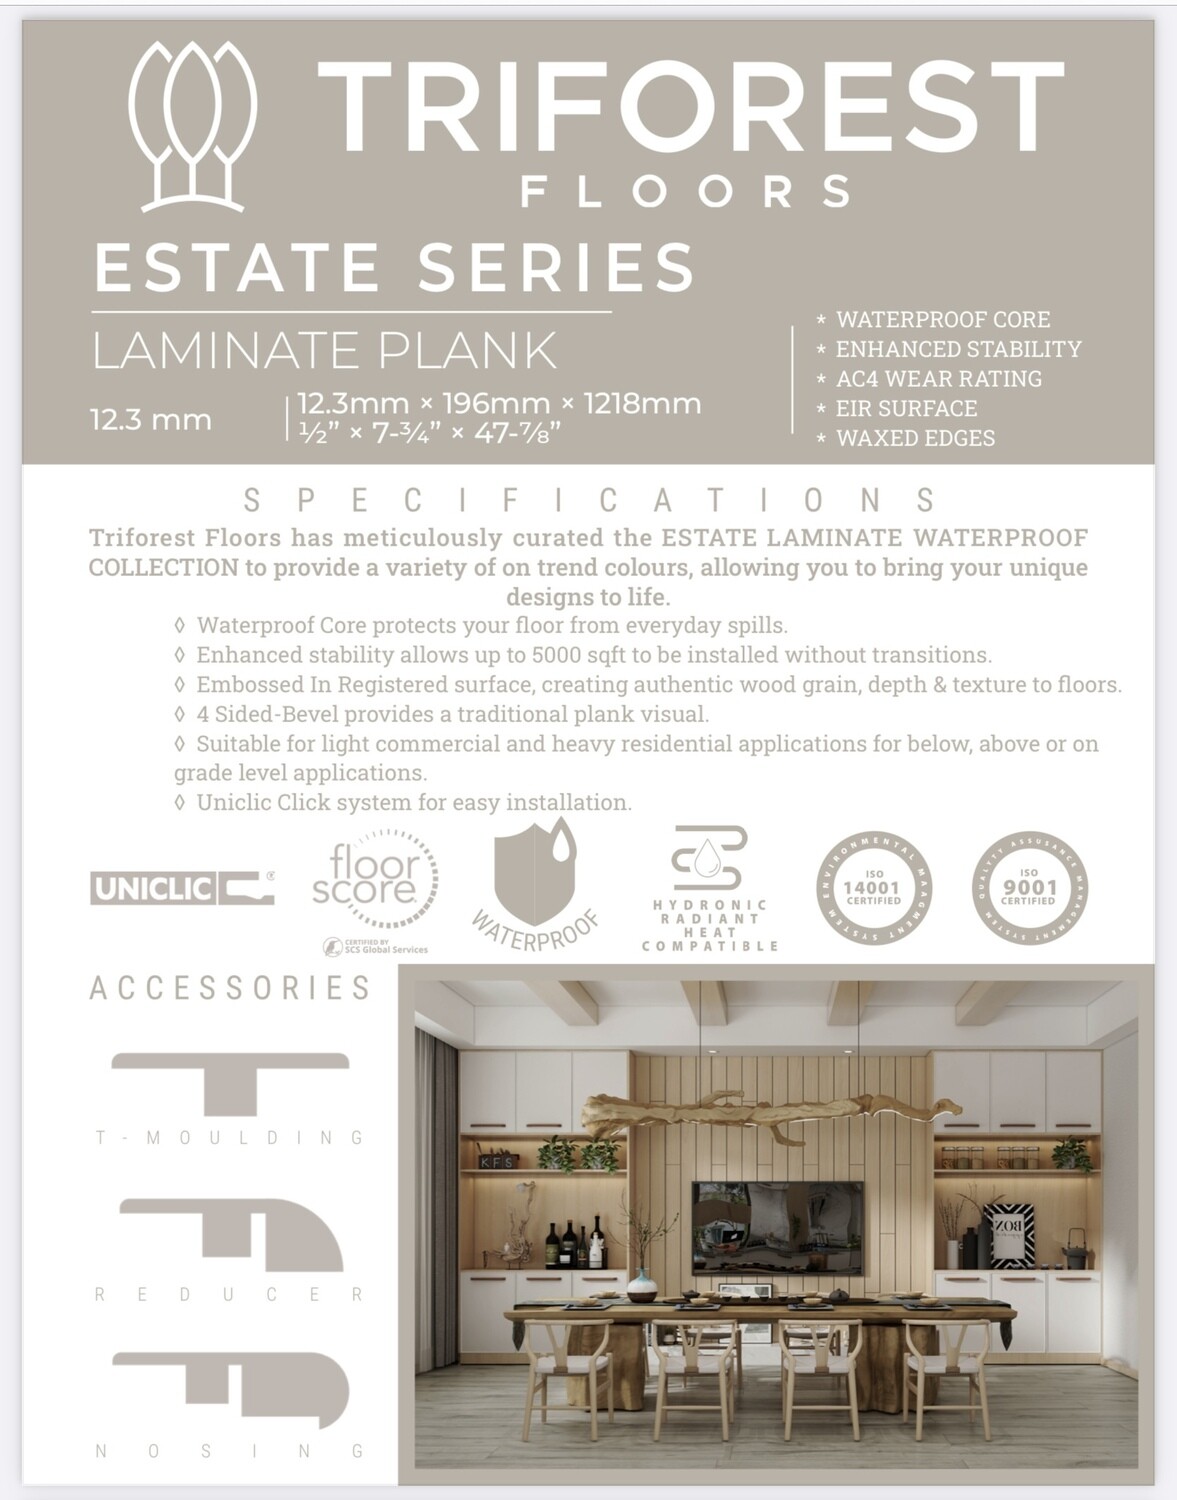 Estate Series Laminate Plank 7x48 (Triforest) available in 12 colors $3.29 SQFT